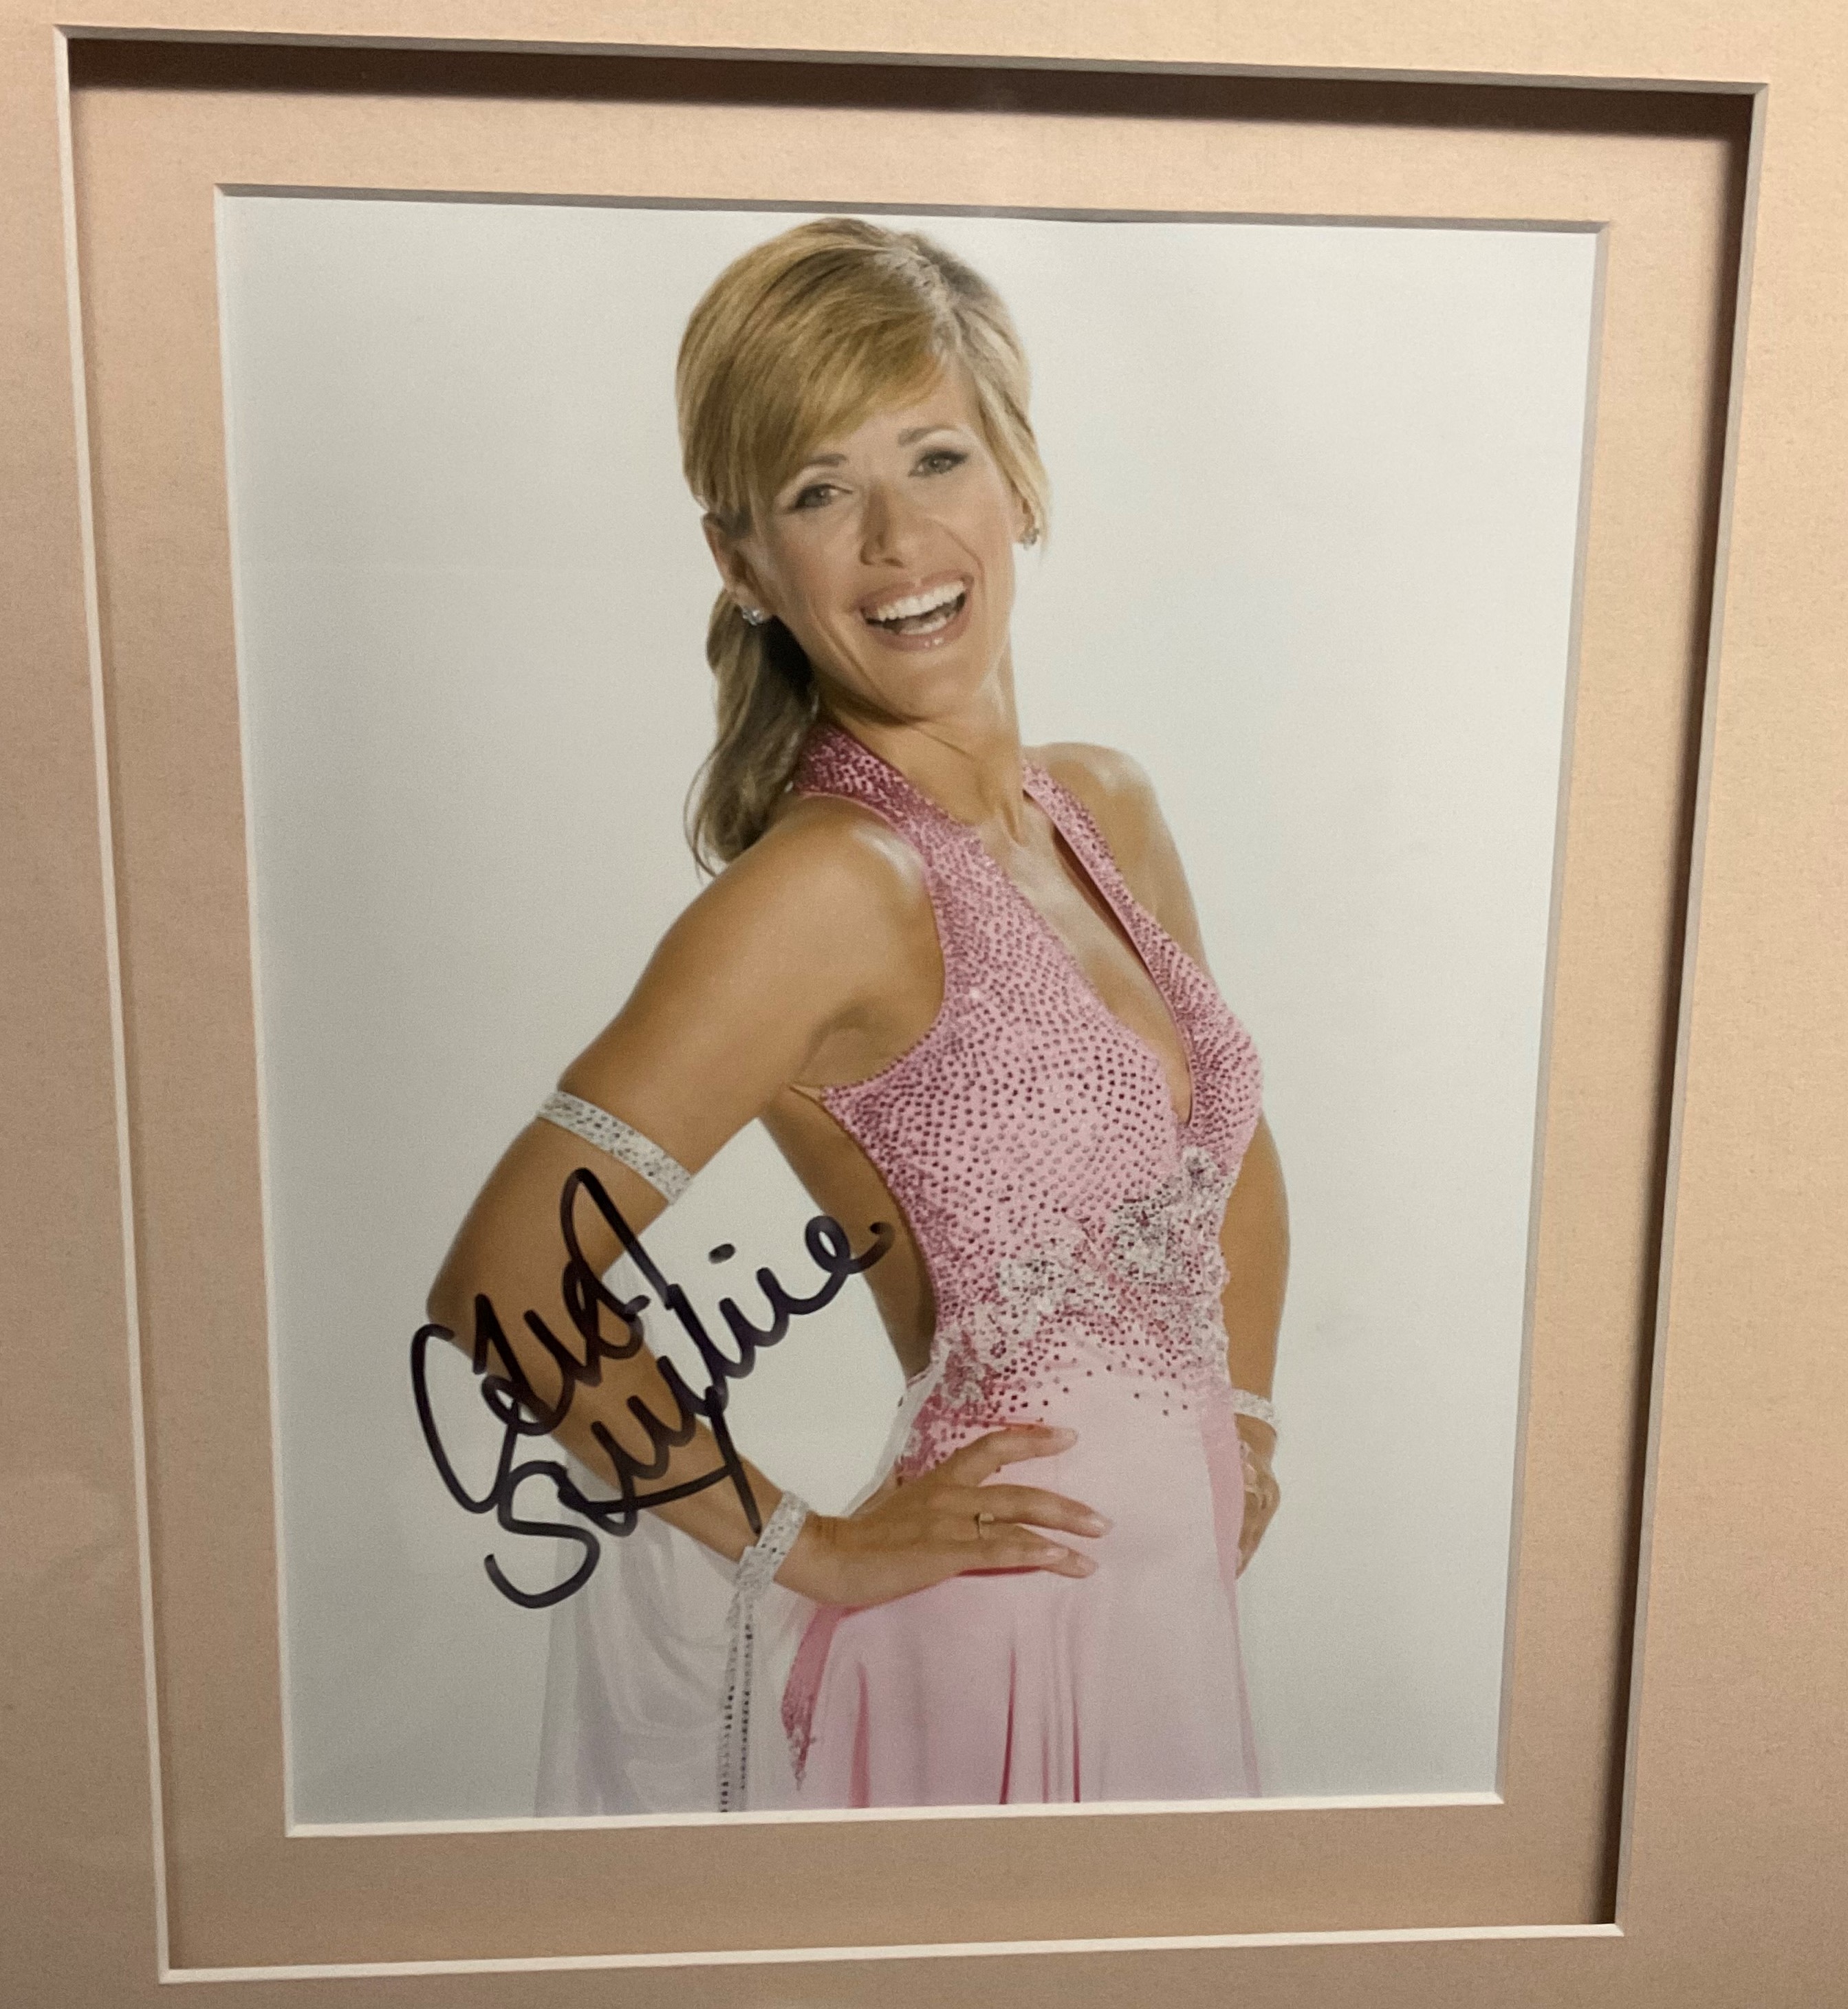 Carol Smillie Hand signed 10x8 Colour Photo in light wood effect Frame measuring 19. 5x18 Overall.